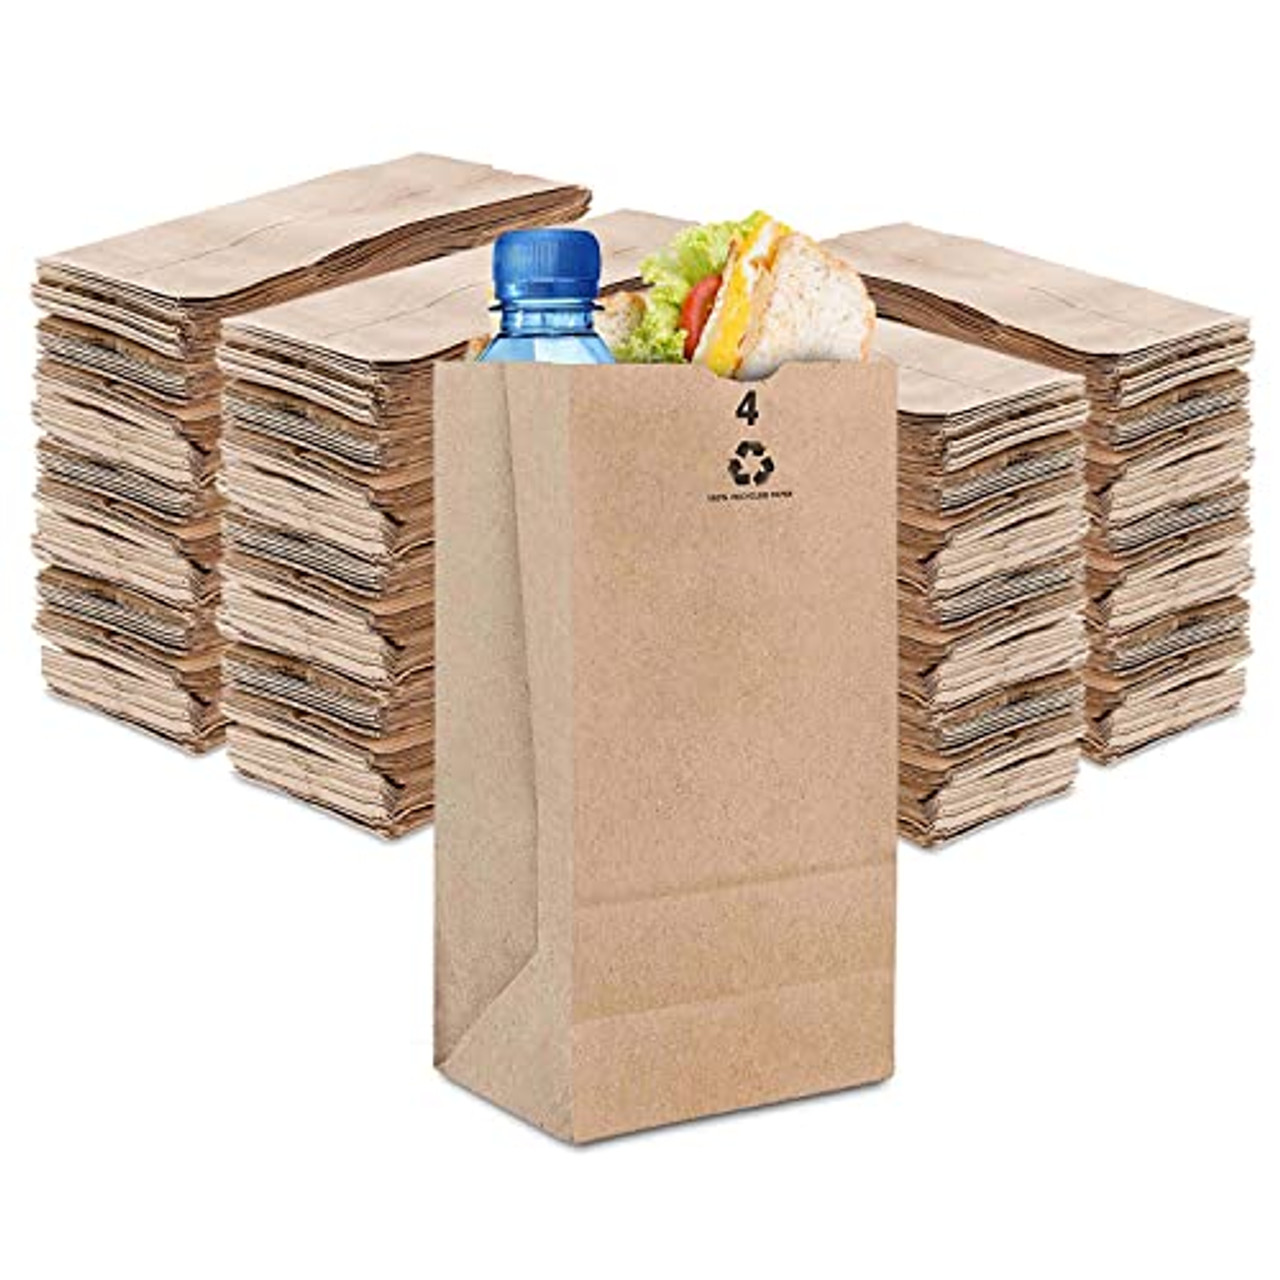 Take Out Essentials 4 lb White Paper Bag (100 Ct) - Eco Friendly Lunch Bags  - Kraft Paper Bags for Packing Lunch Sack Lunch Food Service Bags (4 lb